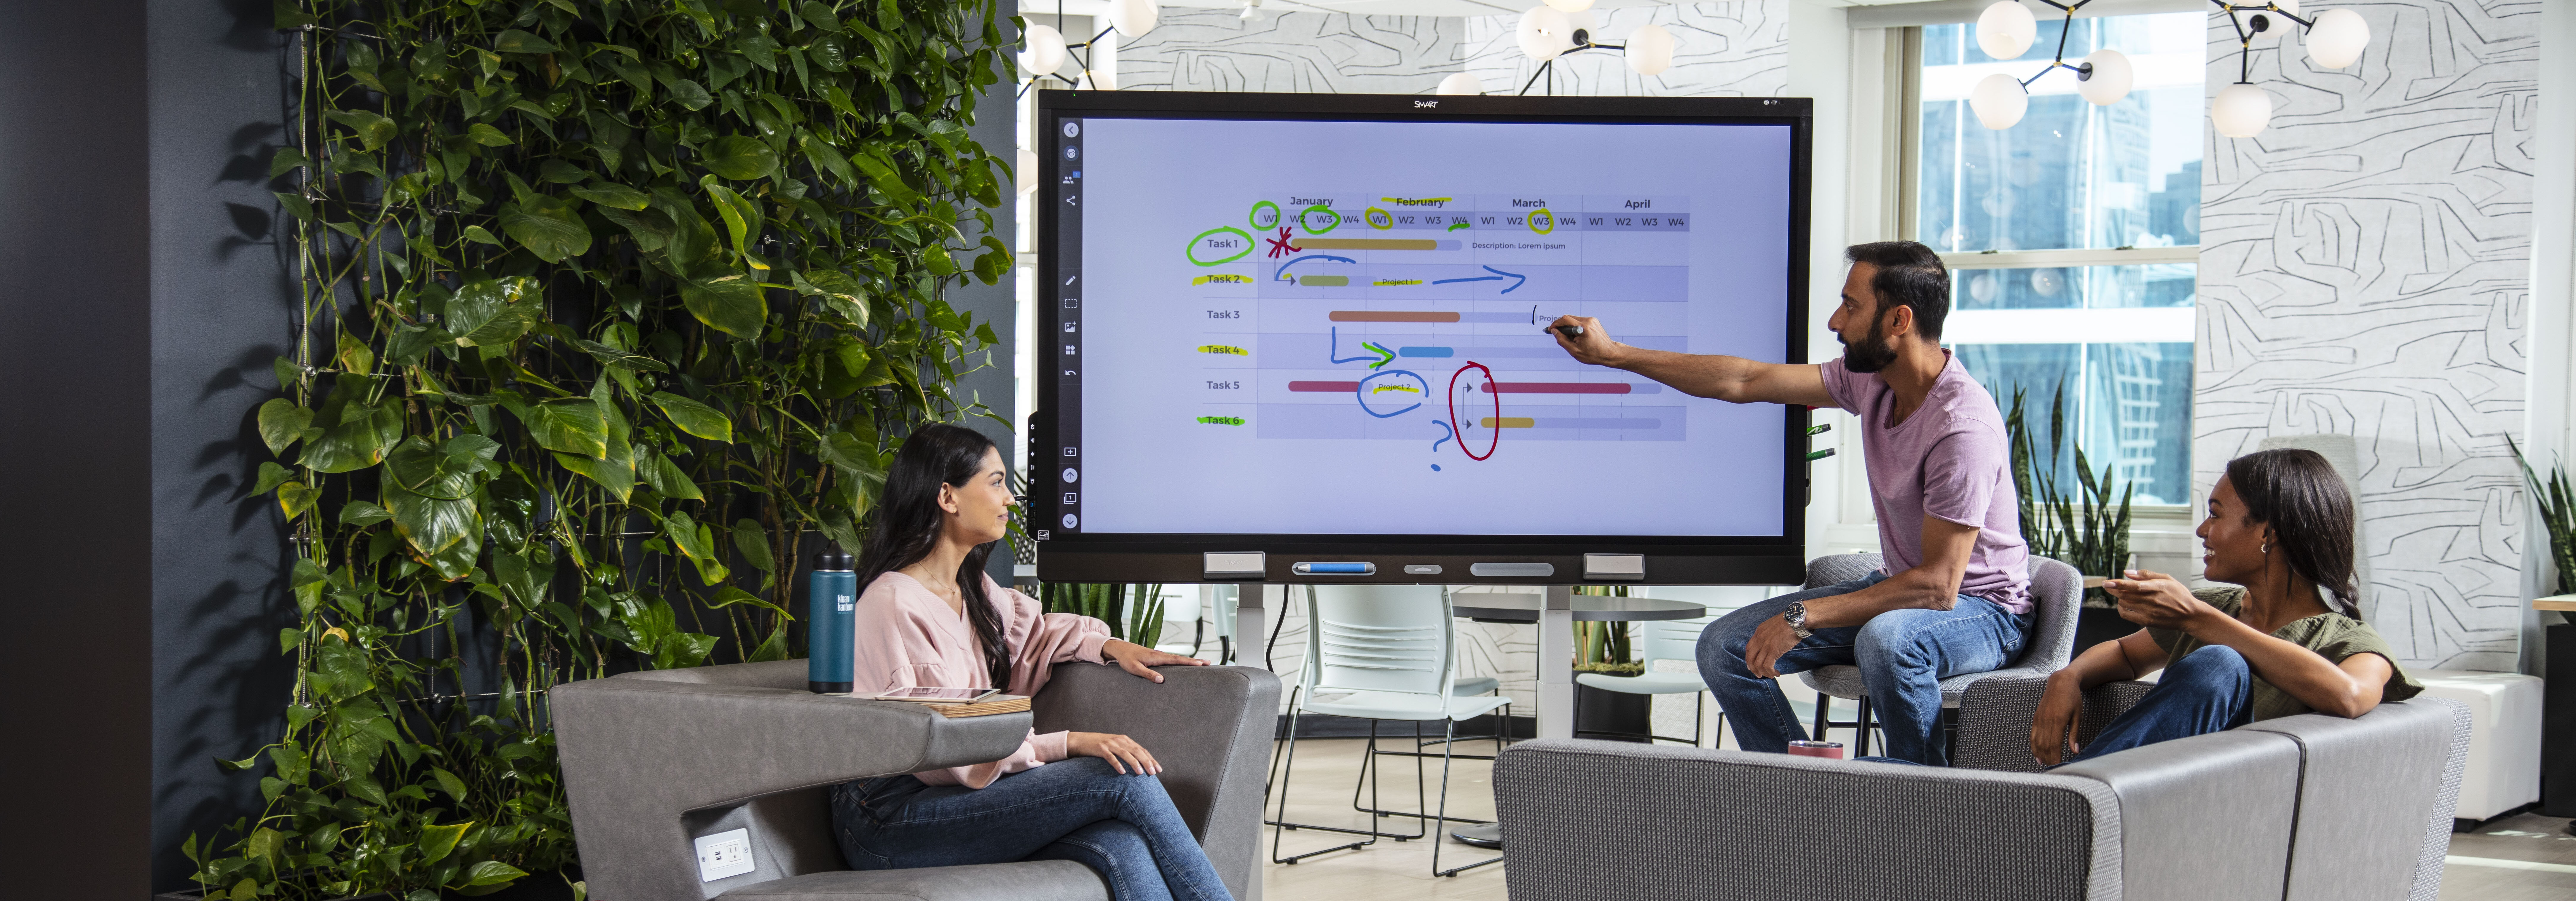 People in a re-designed meeting space with a SMART QX board.